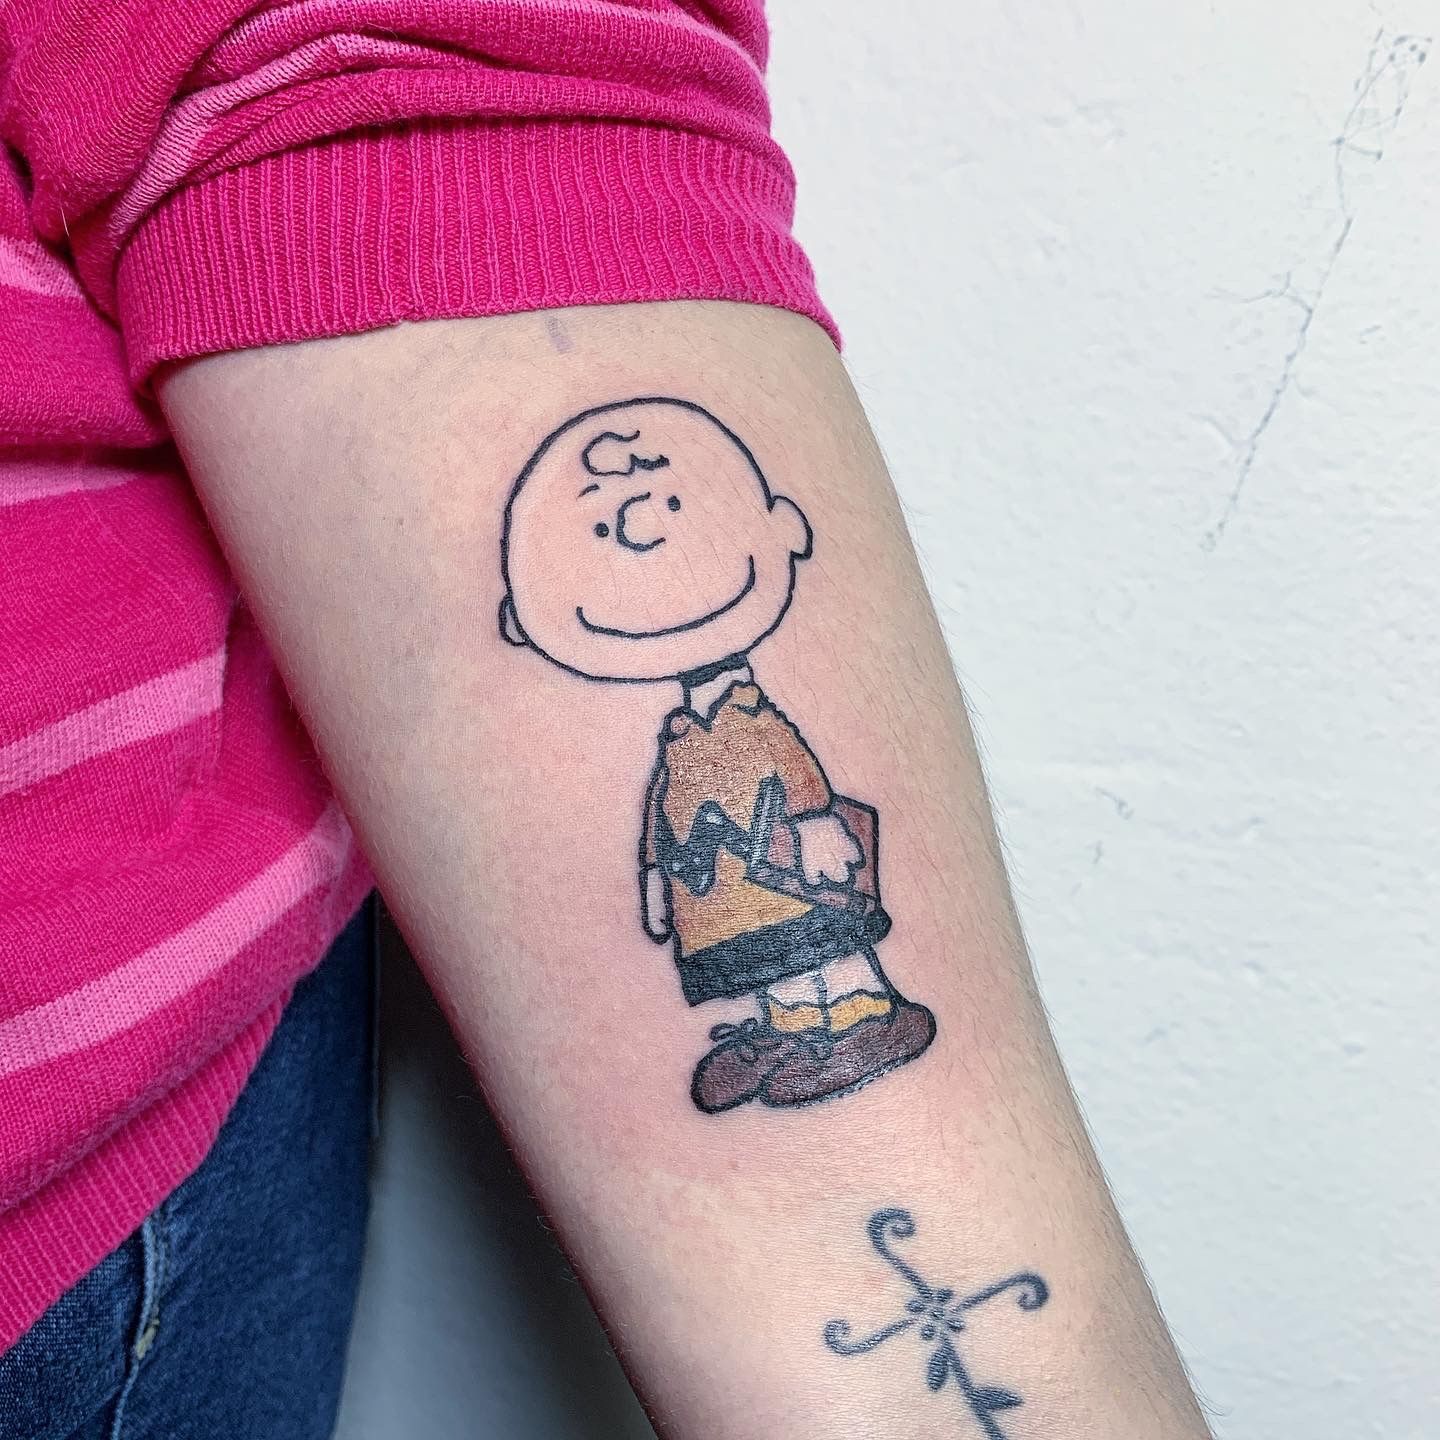 Tattoo tagged with: peanuts character, small, fictional character, micro,  charlie brown, playground, tiny, peanuts comic, cartoon, ifttt, little,  wrist, minimalist, film and book, cartoon character | inked-app.com